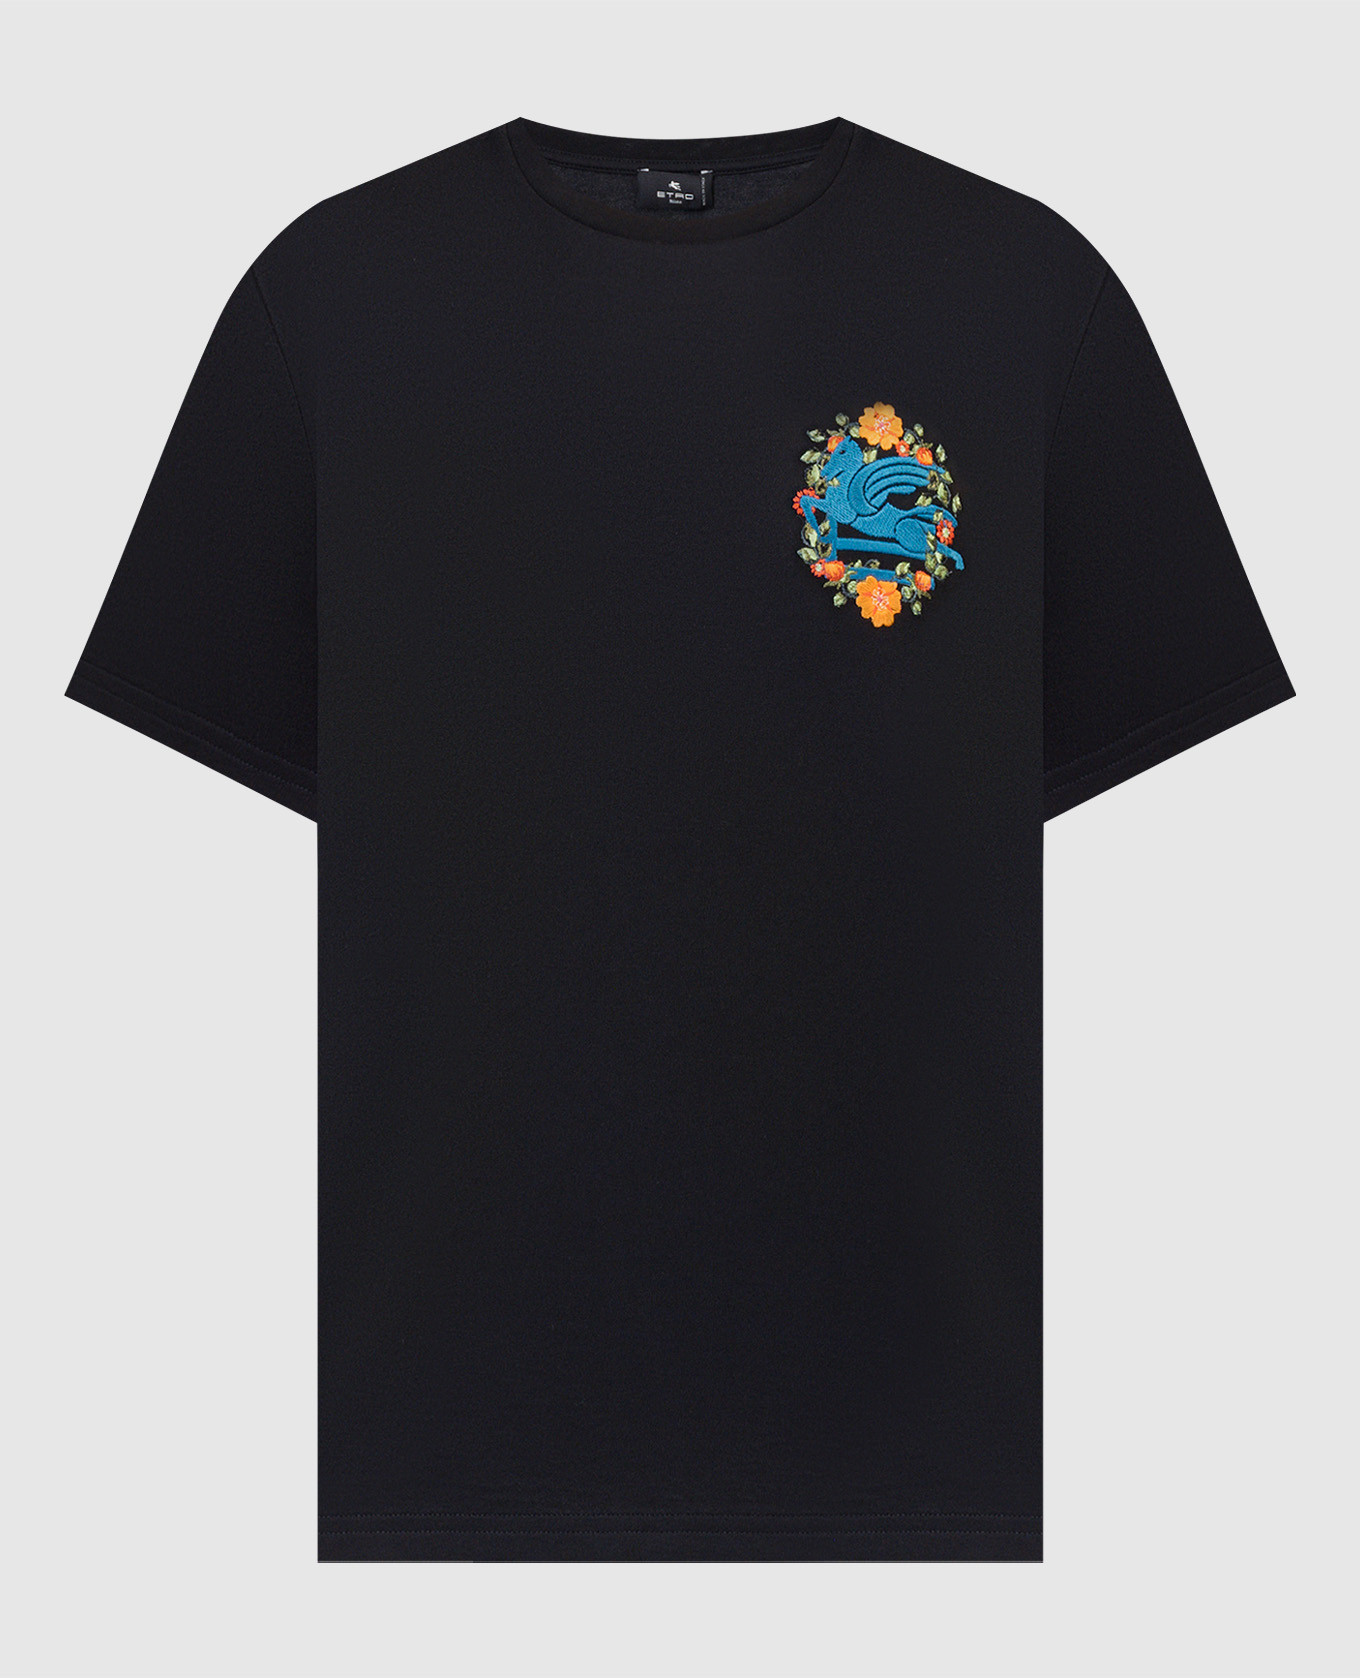 Black t-shirt with Pegaso logo embroidery